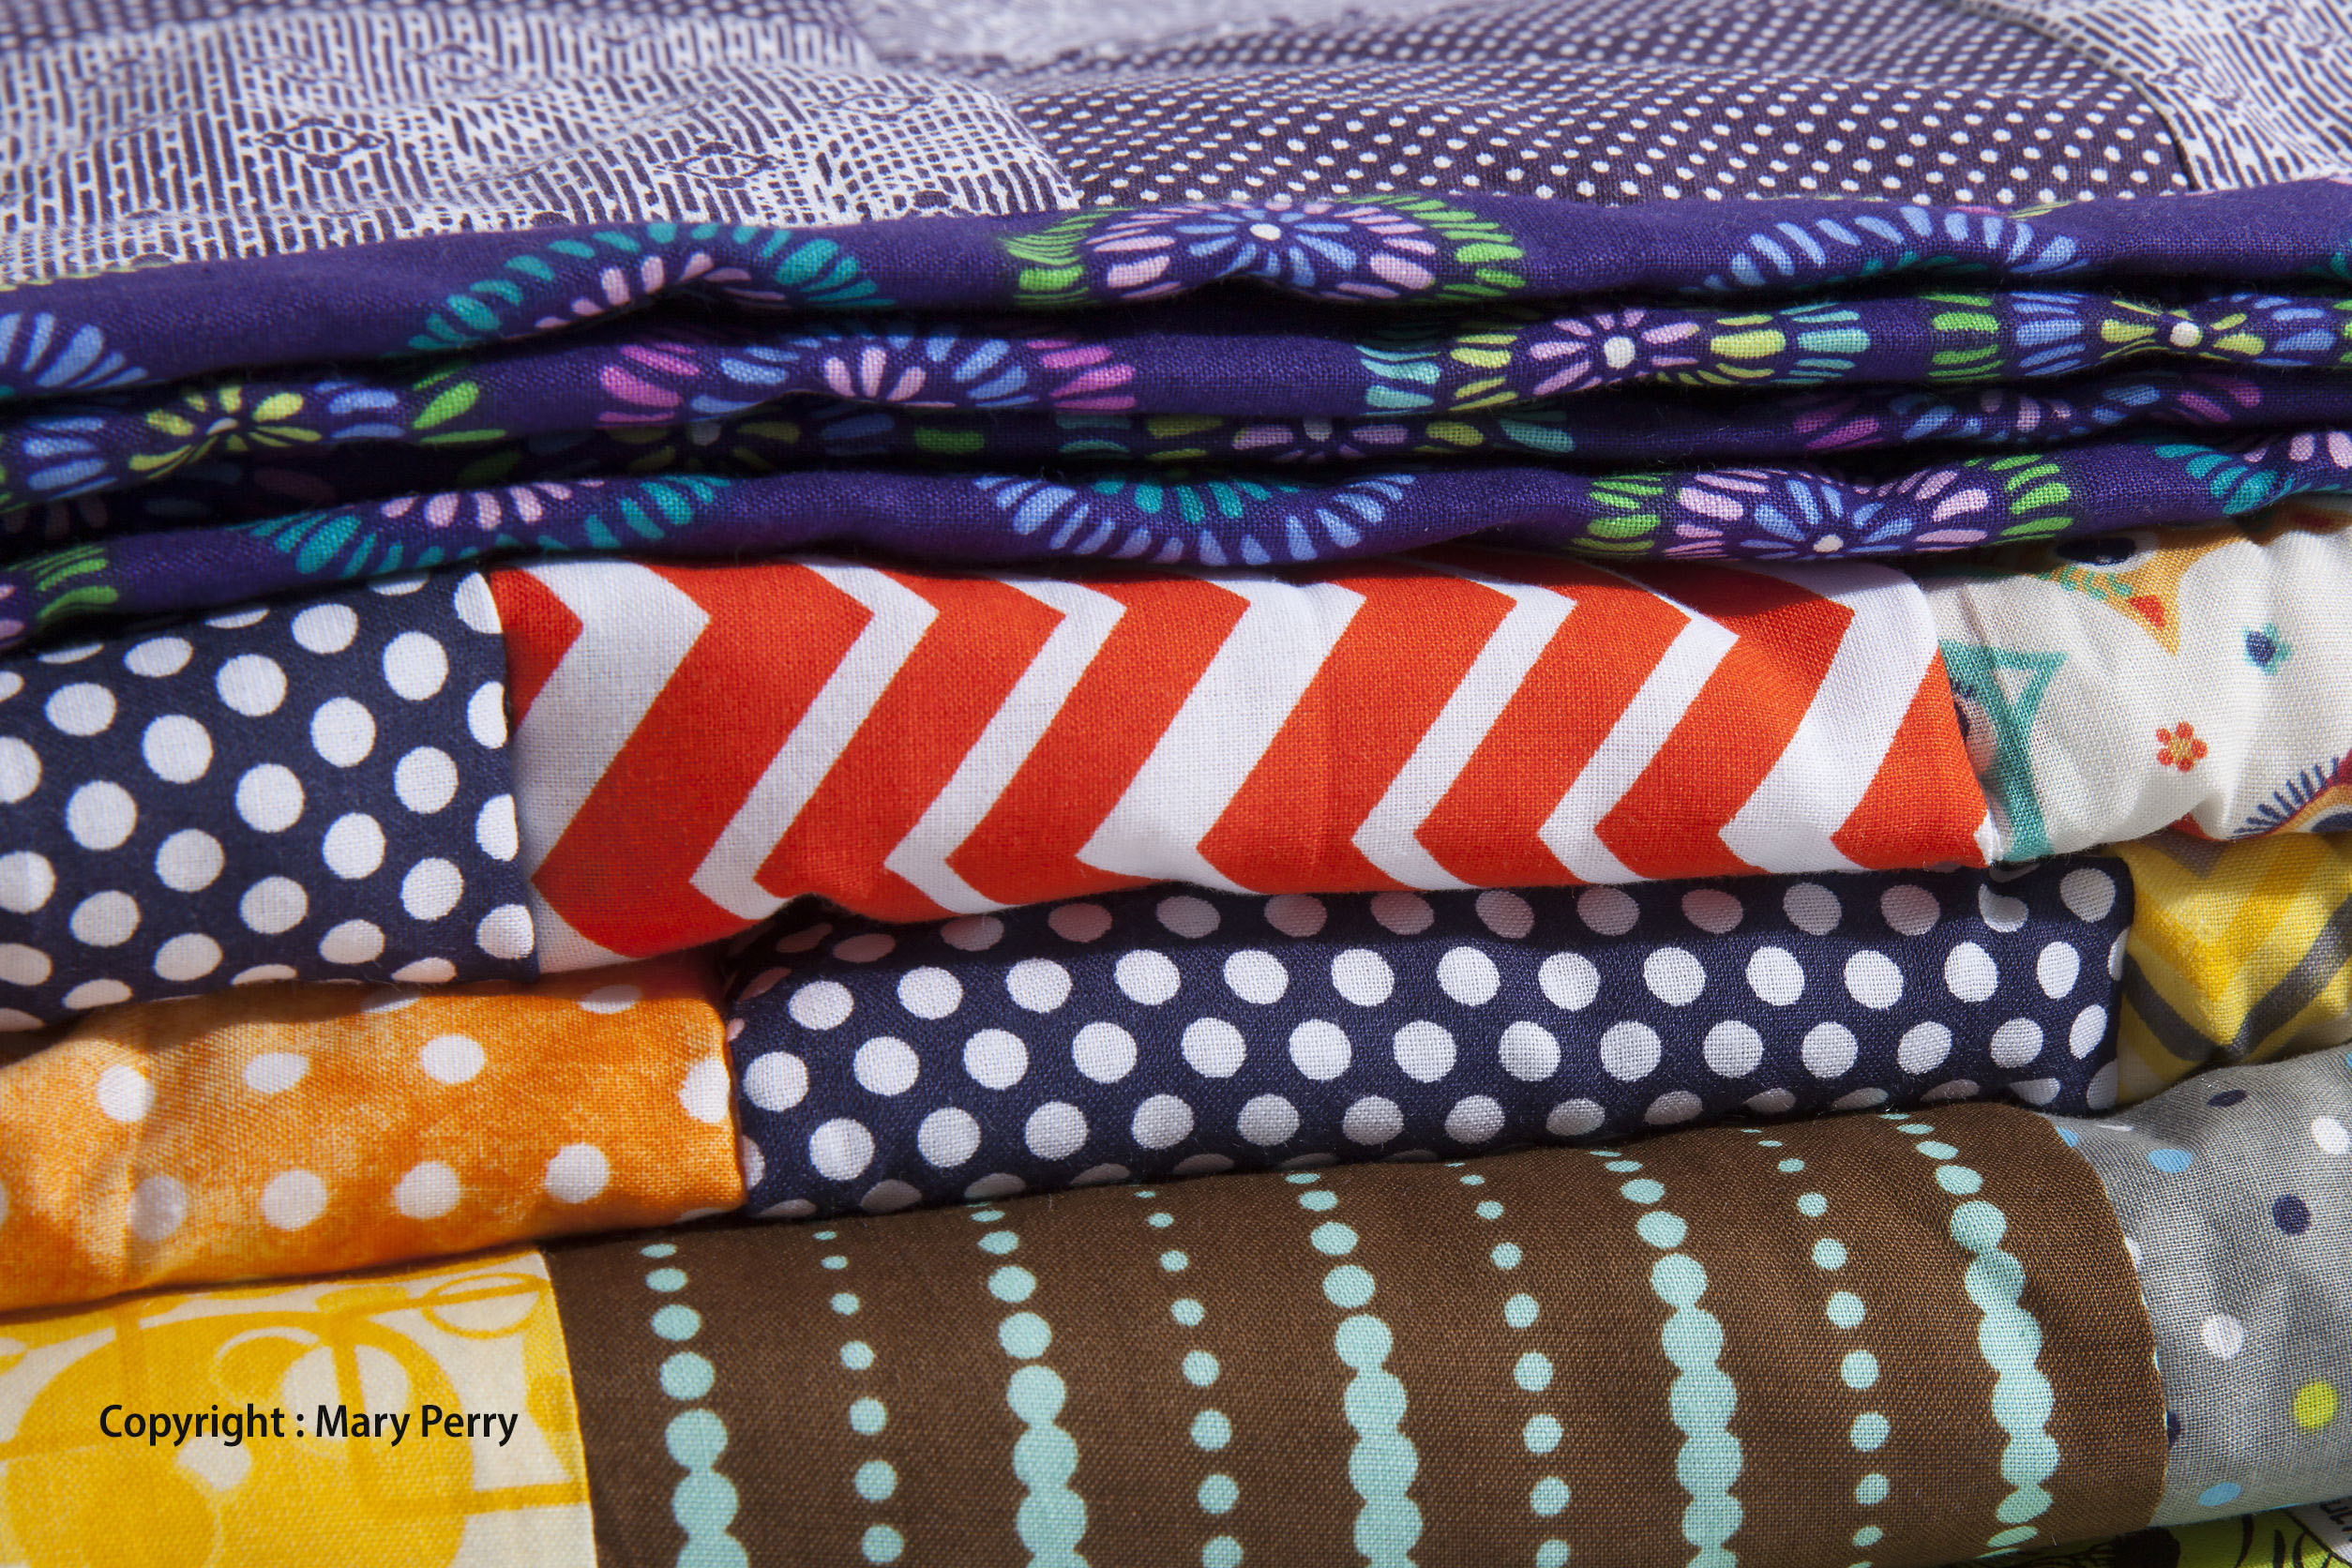 39550917 - a close up of stacked quilts showing different patterns and cloth texture.